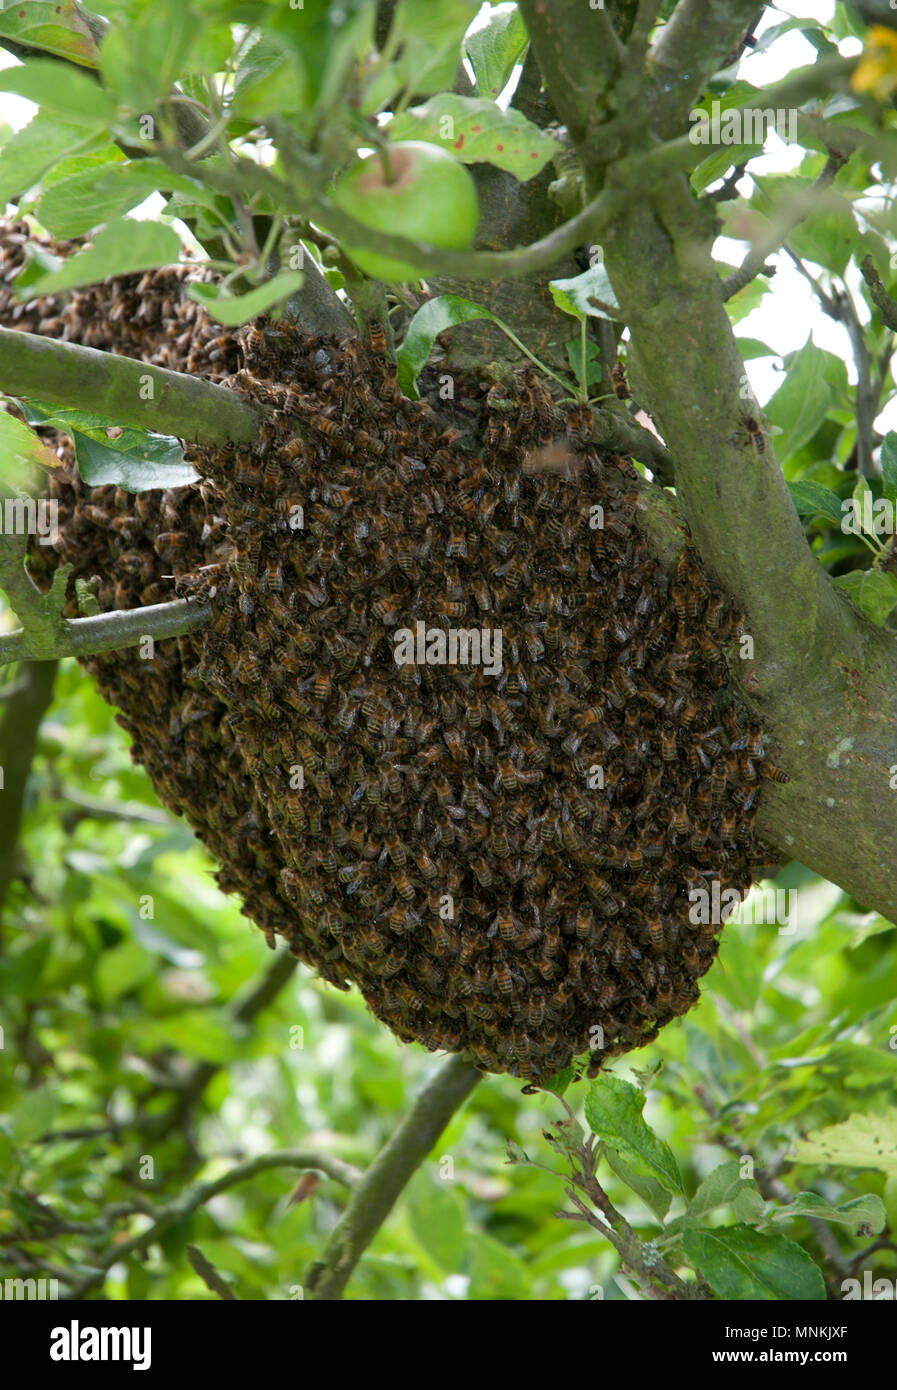 A Swarm of Honey Bees in an Apple Tree Stock Photo